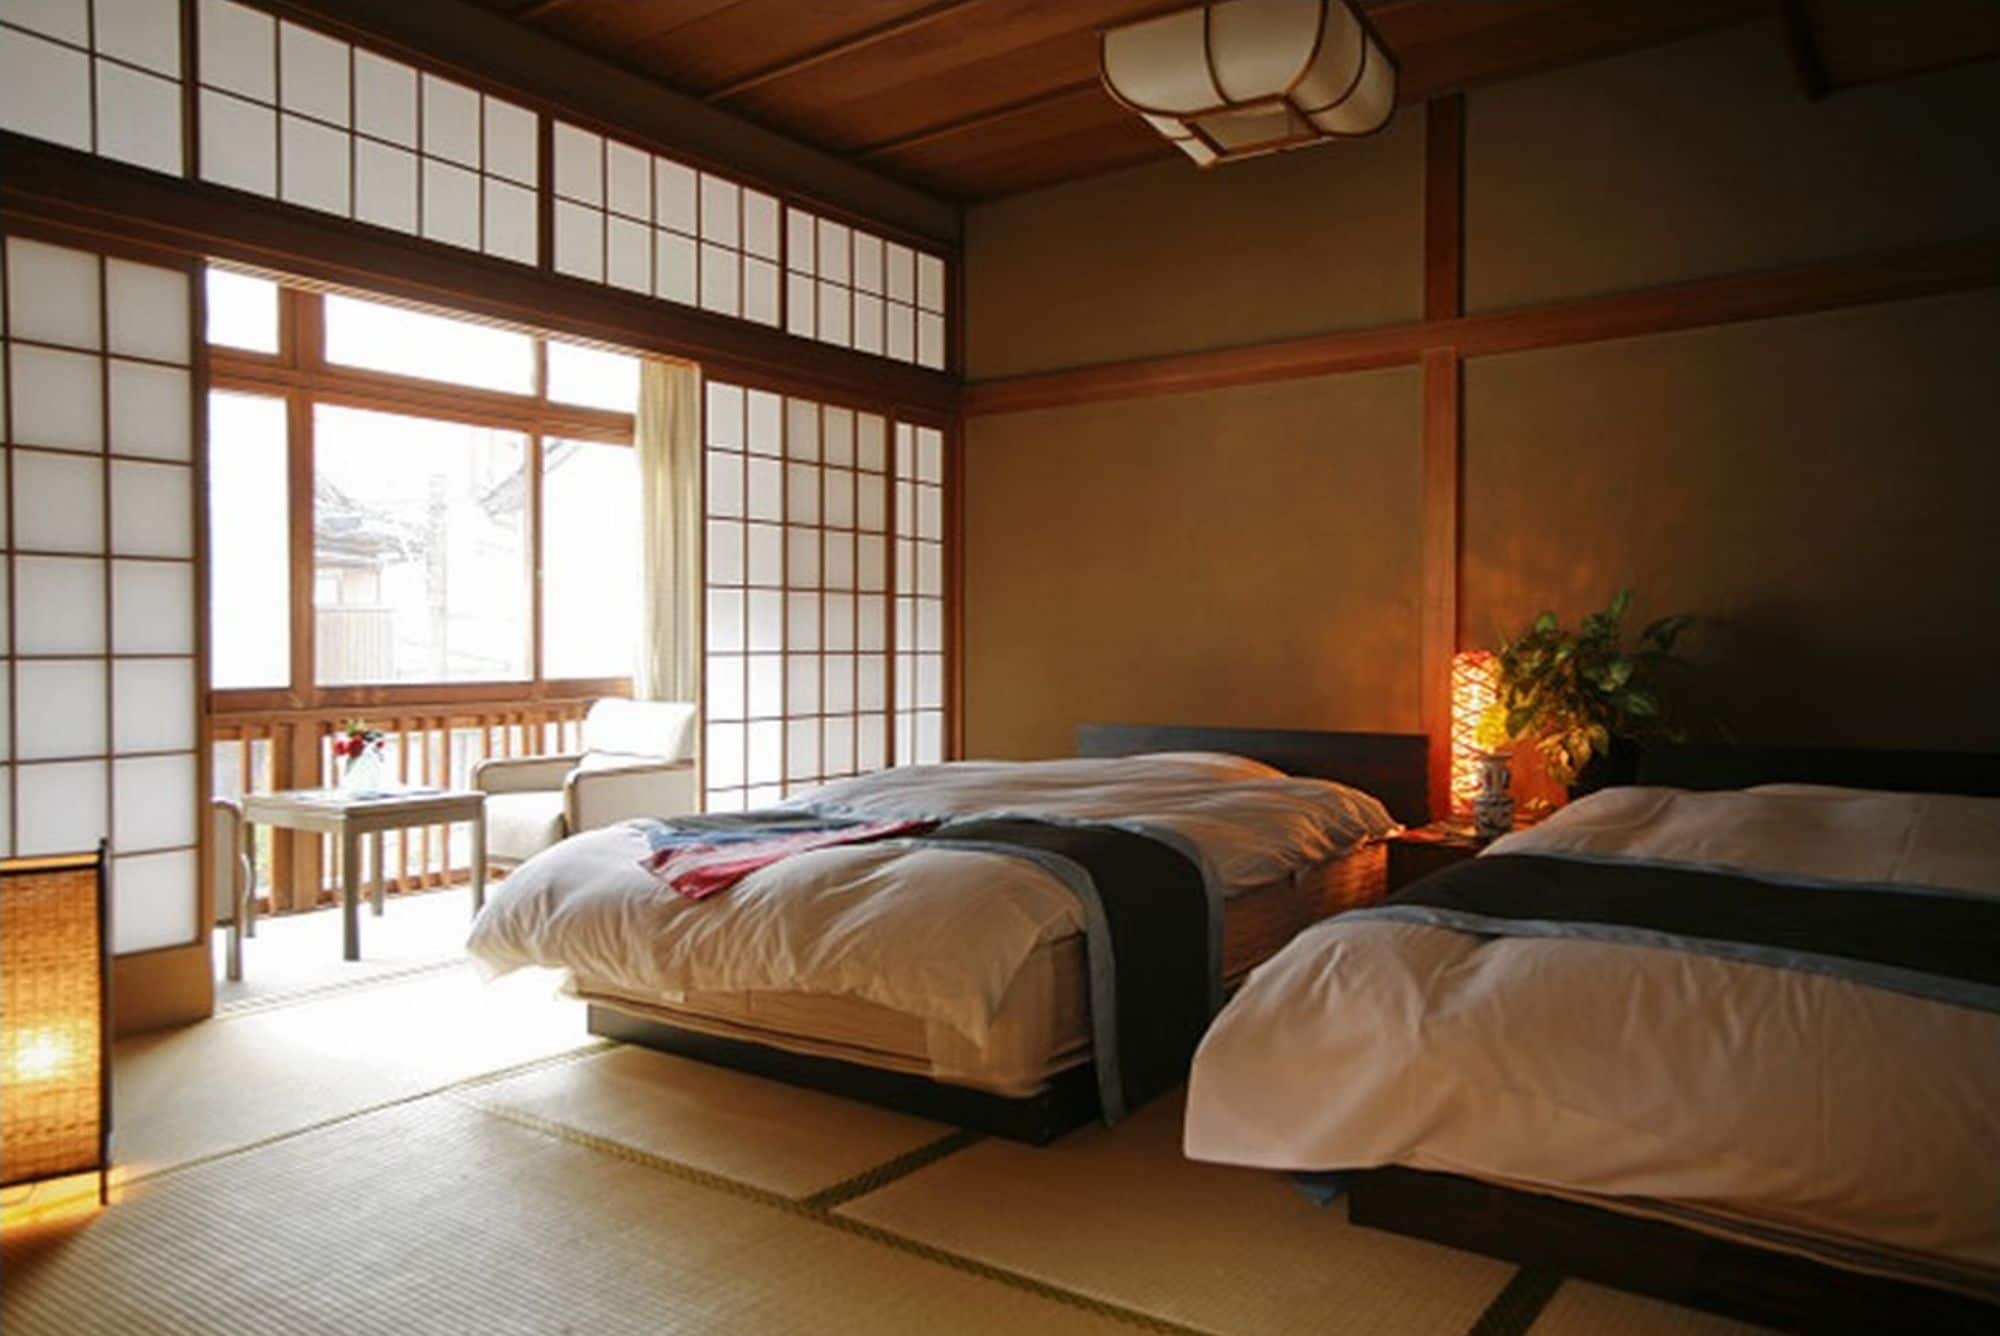 Simmons' twin Japanese-style bedroom. It has a low bed on tatami mats.